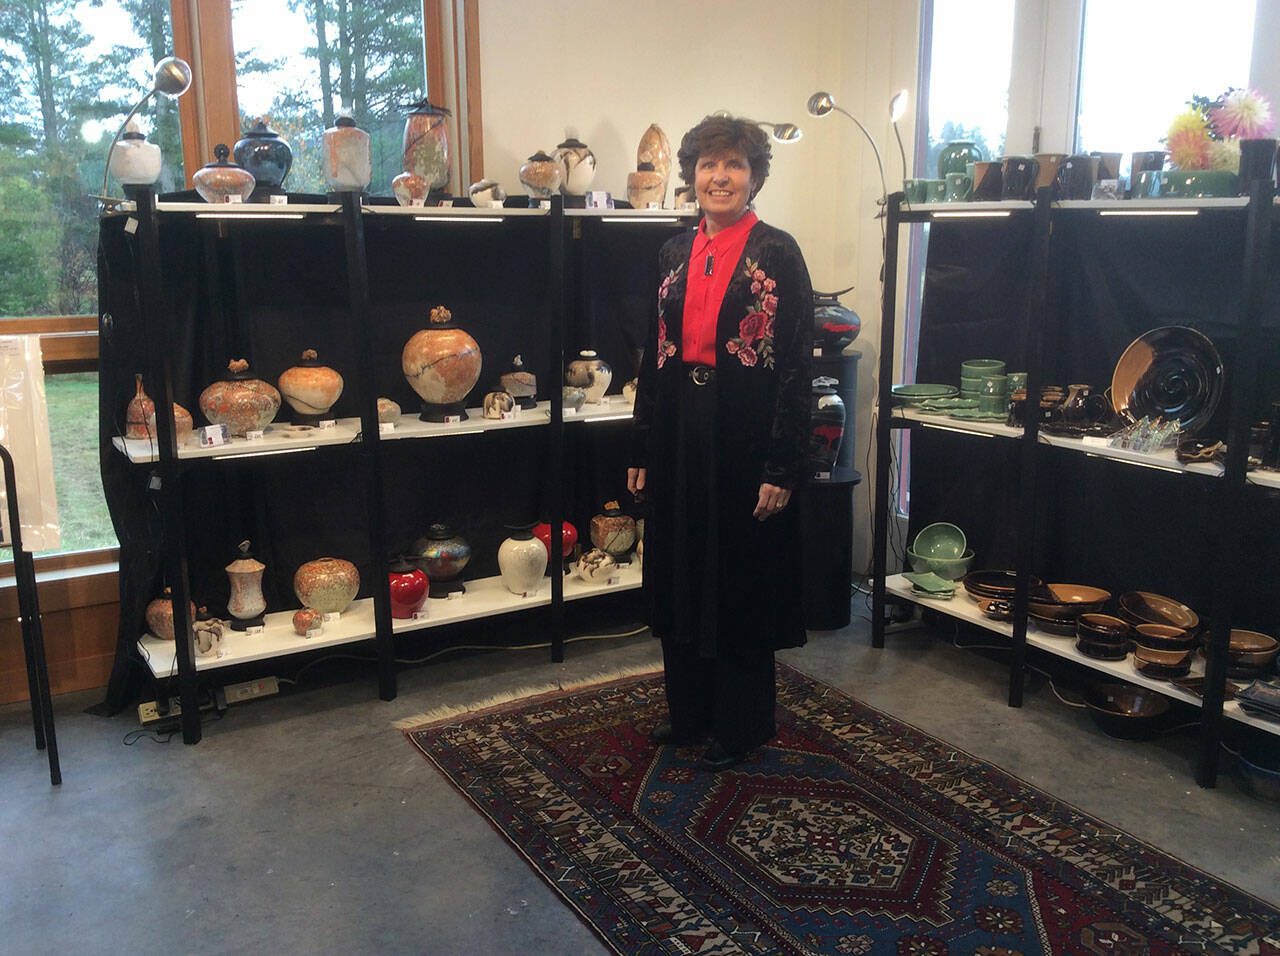 Local ceramics artist Wanda Garrity has been in the studio tour for many years and will be again this year.